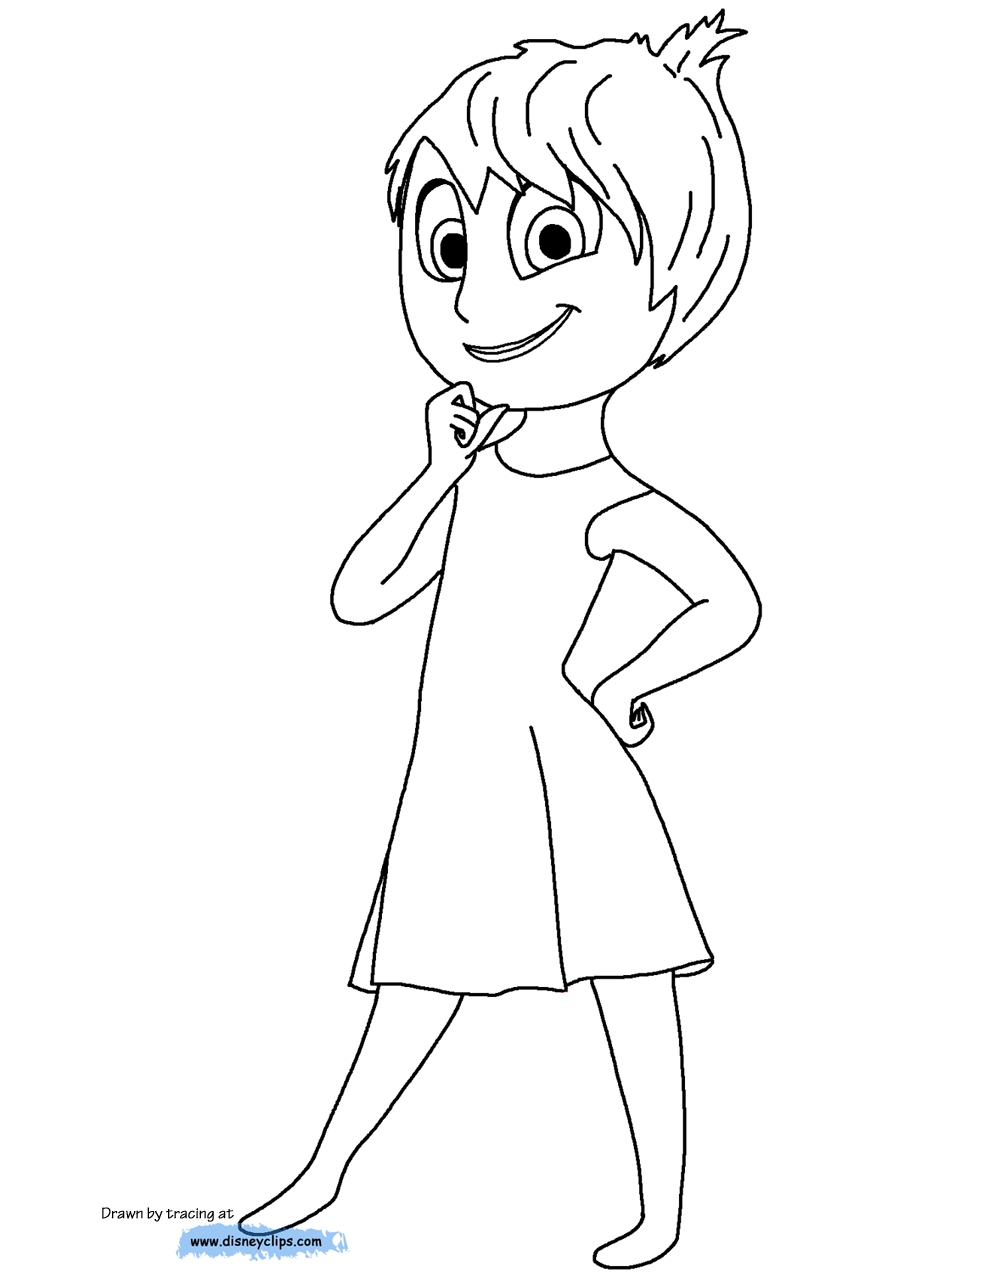 Inside Out Coloring Pages   Disneyclips.com